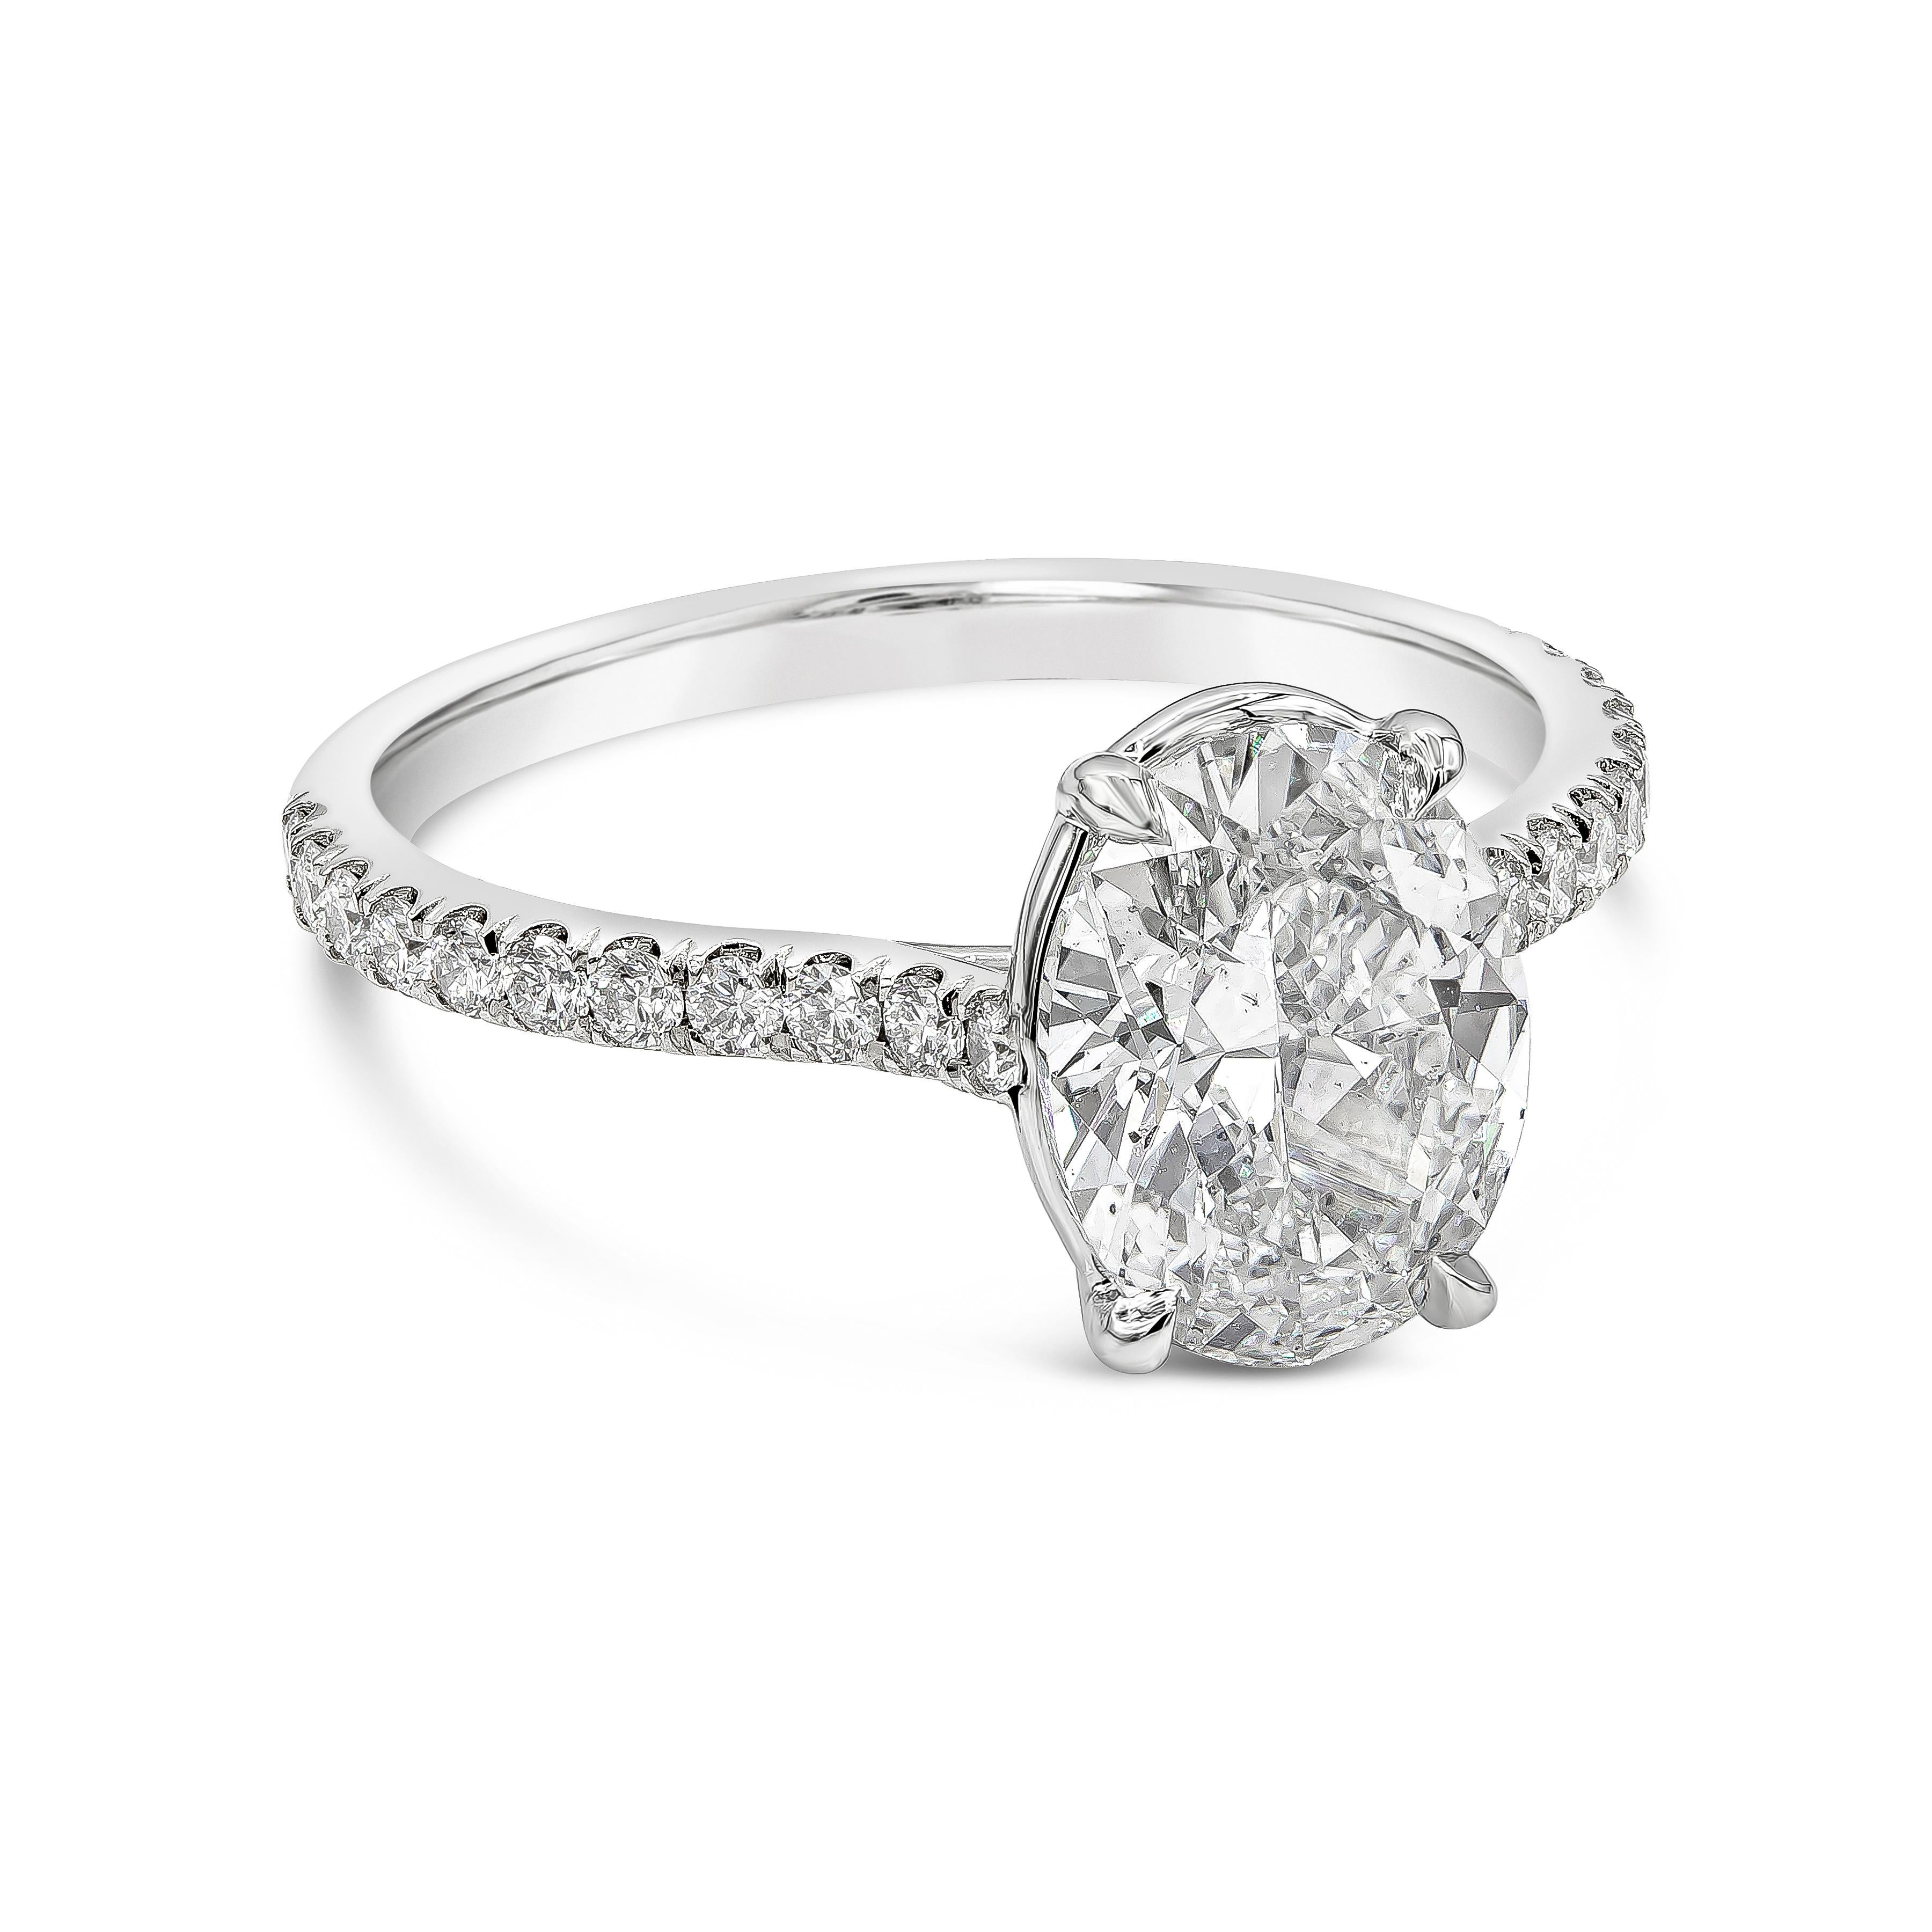 A timeless engagement ring showcasing a GIA Certified (G-SI1) oval cut diamond weighing 2.02 carats, set in a polished platinum mounting accented with round brilliant diamonds. Side diamonds weigh 0.32 carats total. Size 6.25 US (sizable upon